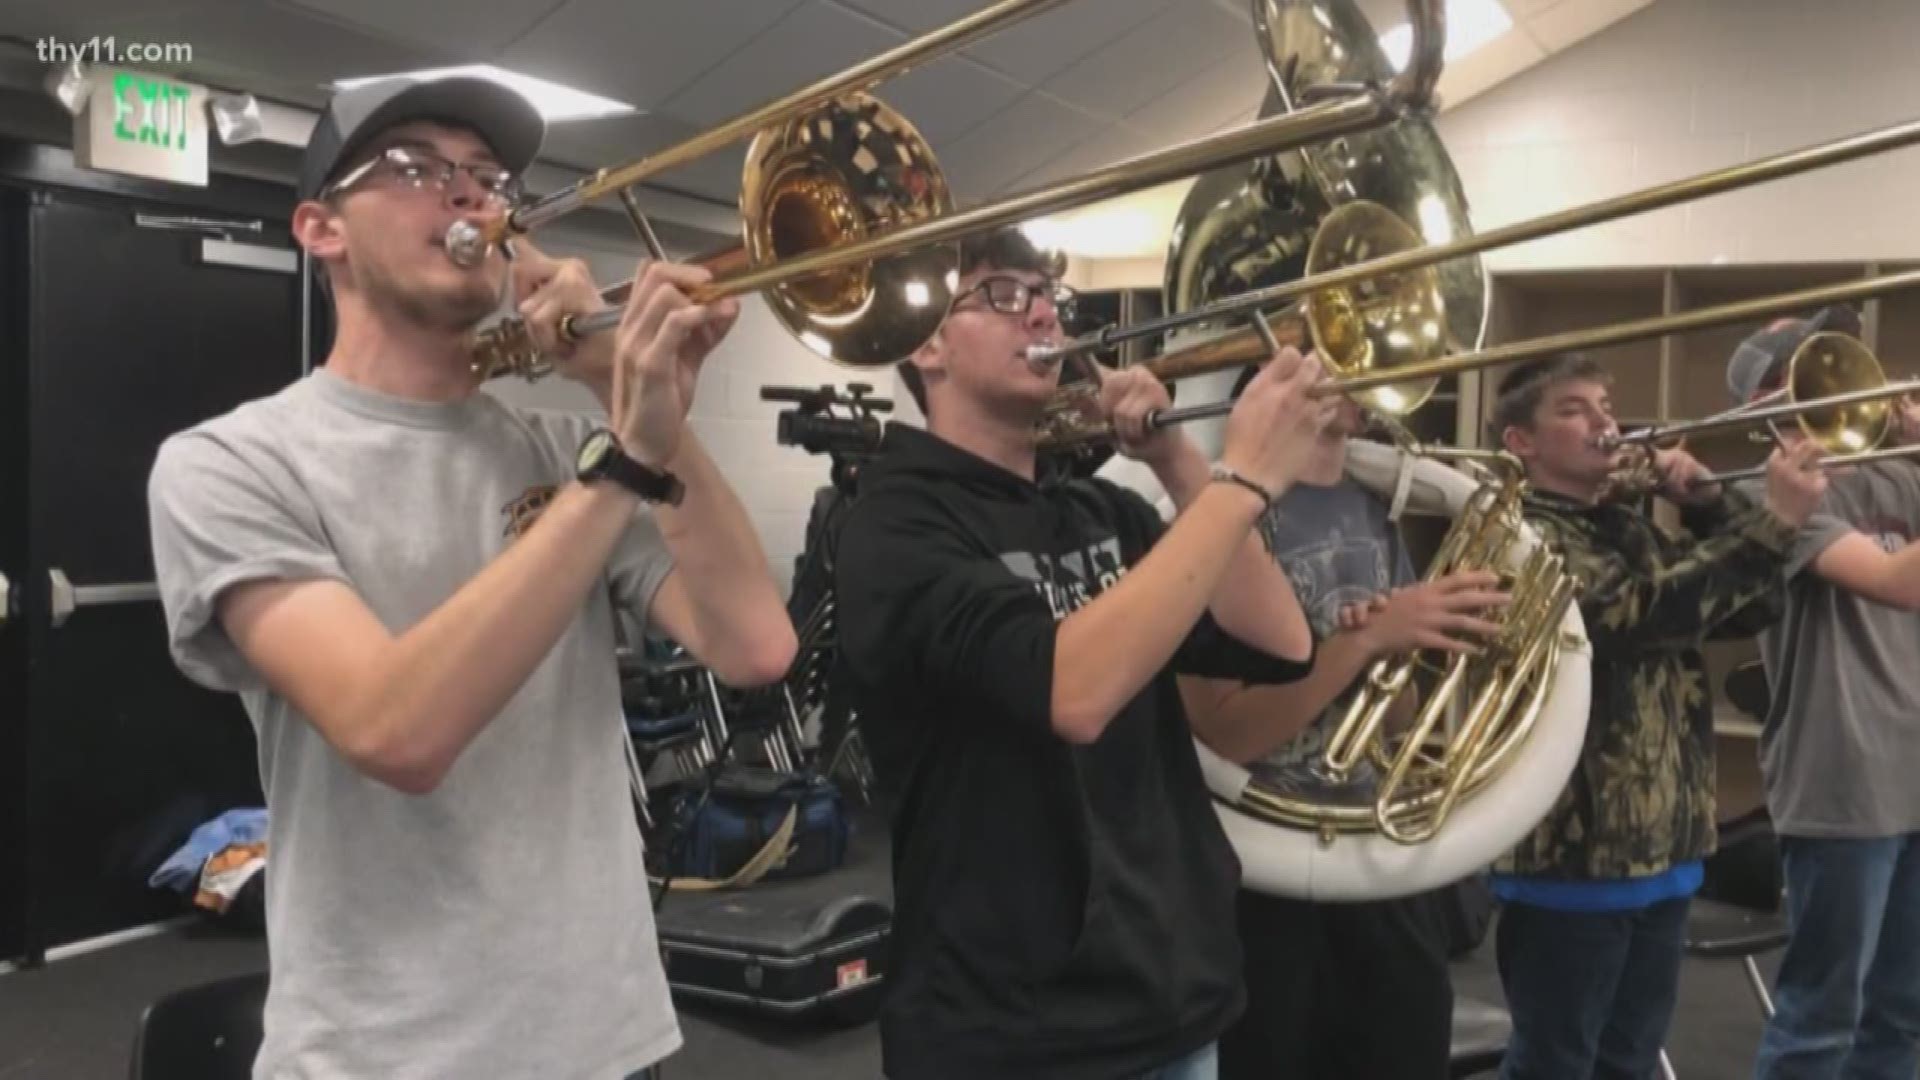 Dozens of students from a small central Arkansas high school will get to show off their talents at one of the biggest football events of the year.